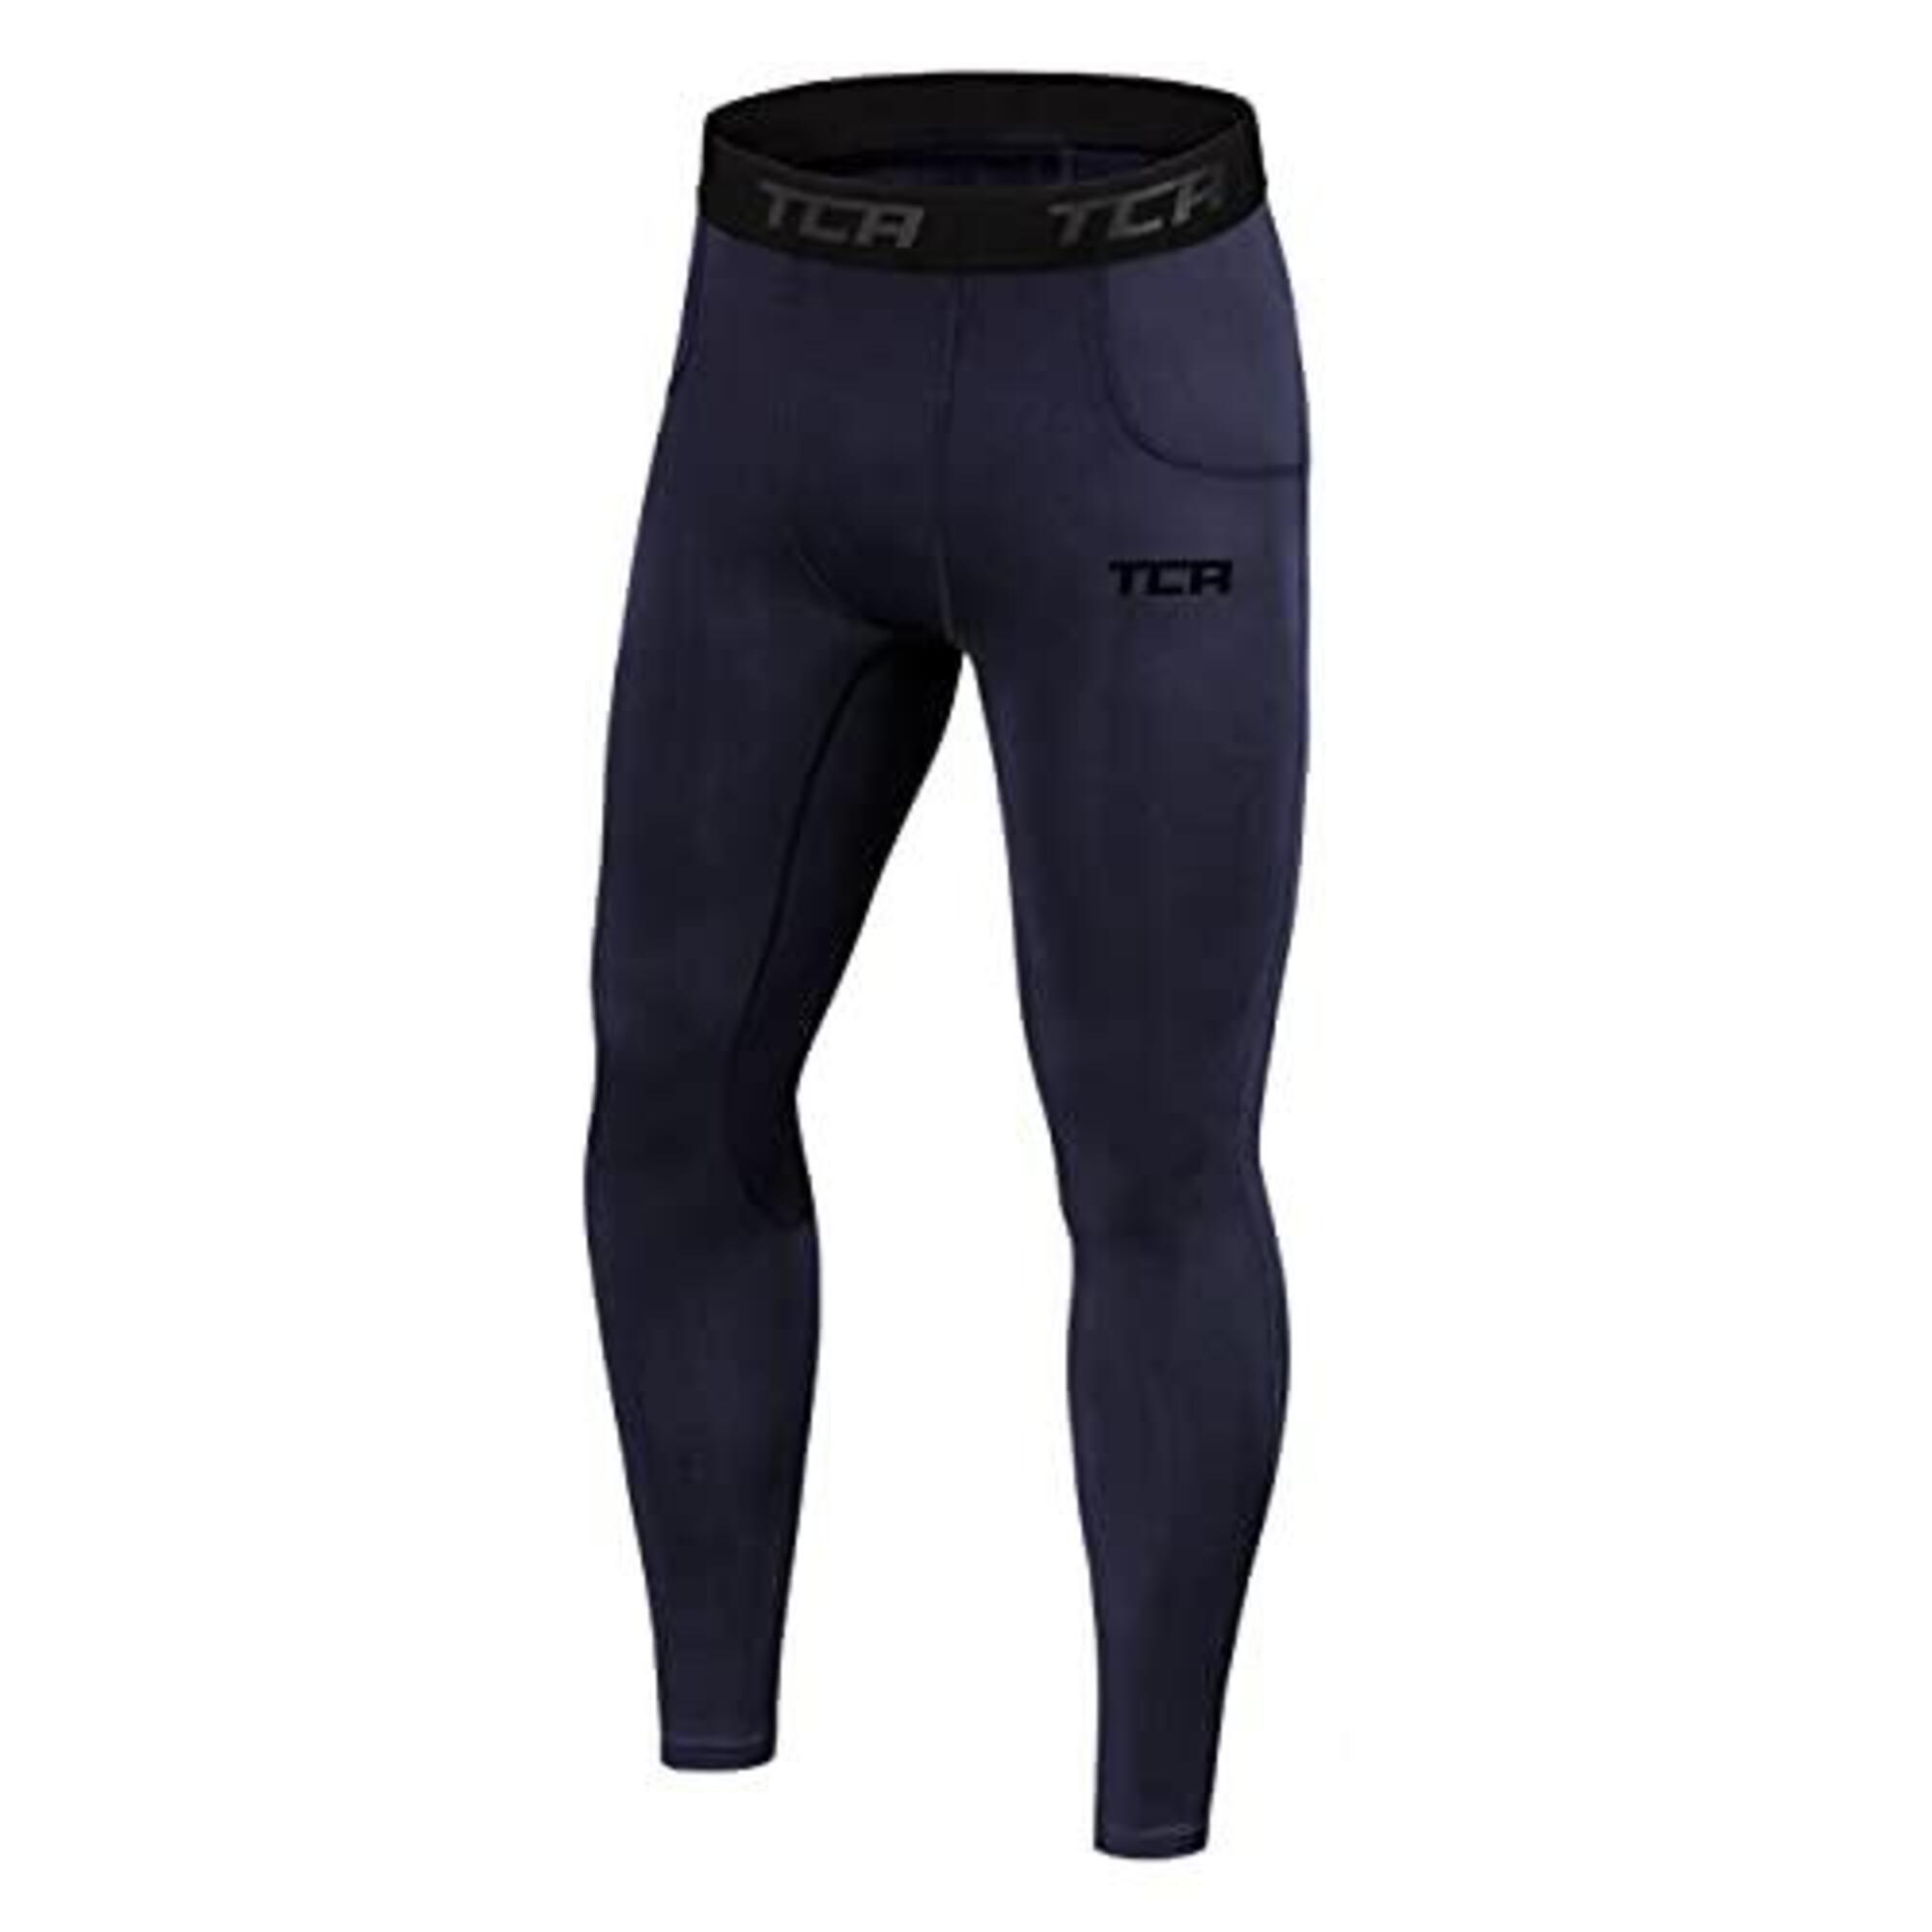 TCA Boys' Super Thermal Compression Leggings - Navy Eclipse/Navy Eclipse